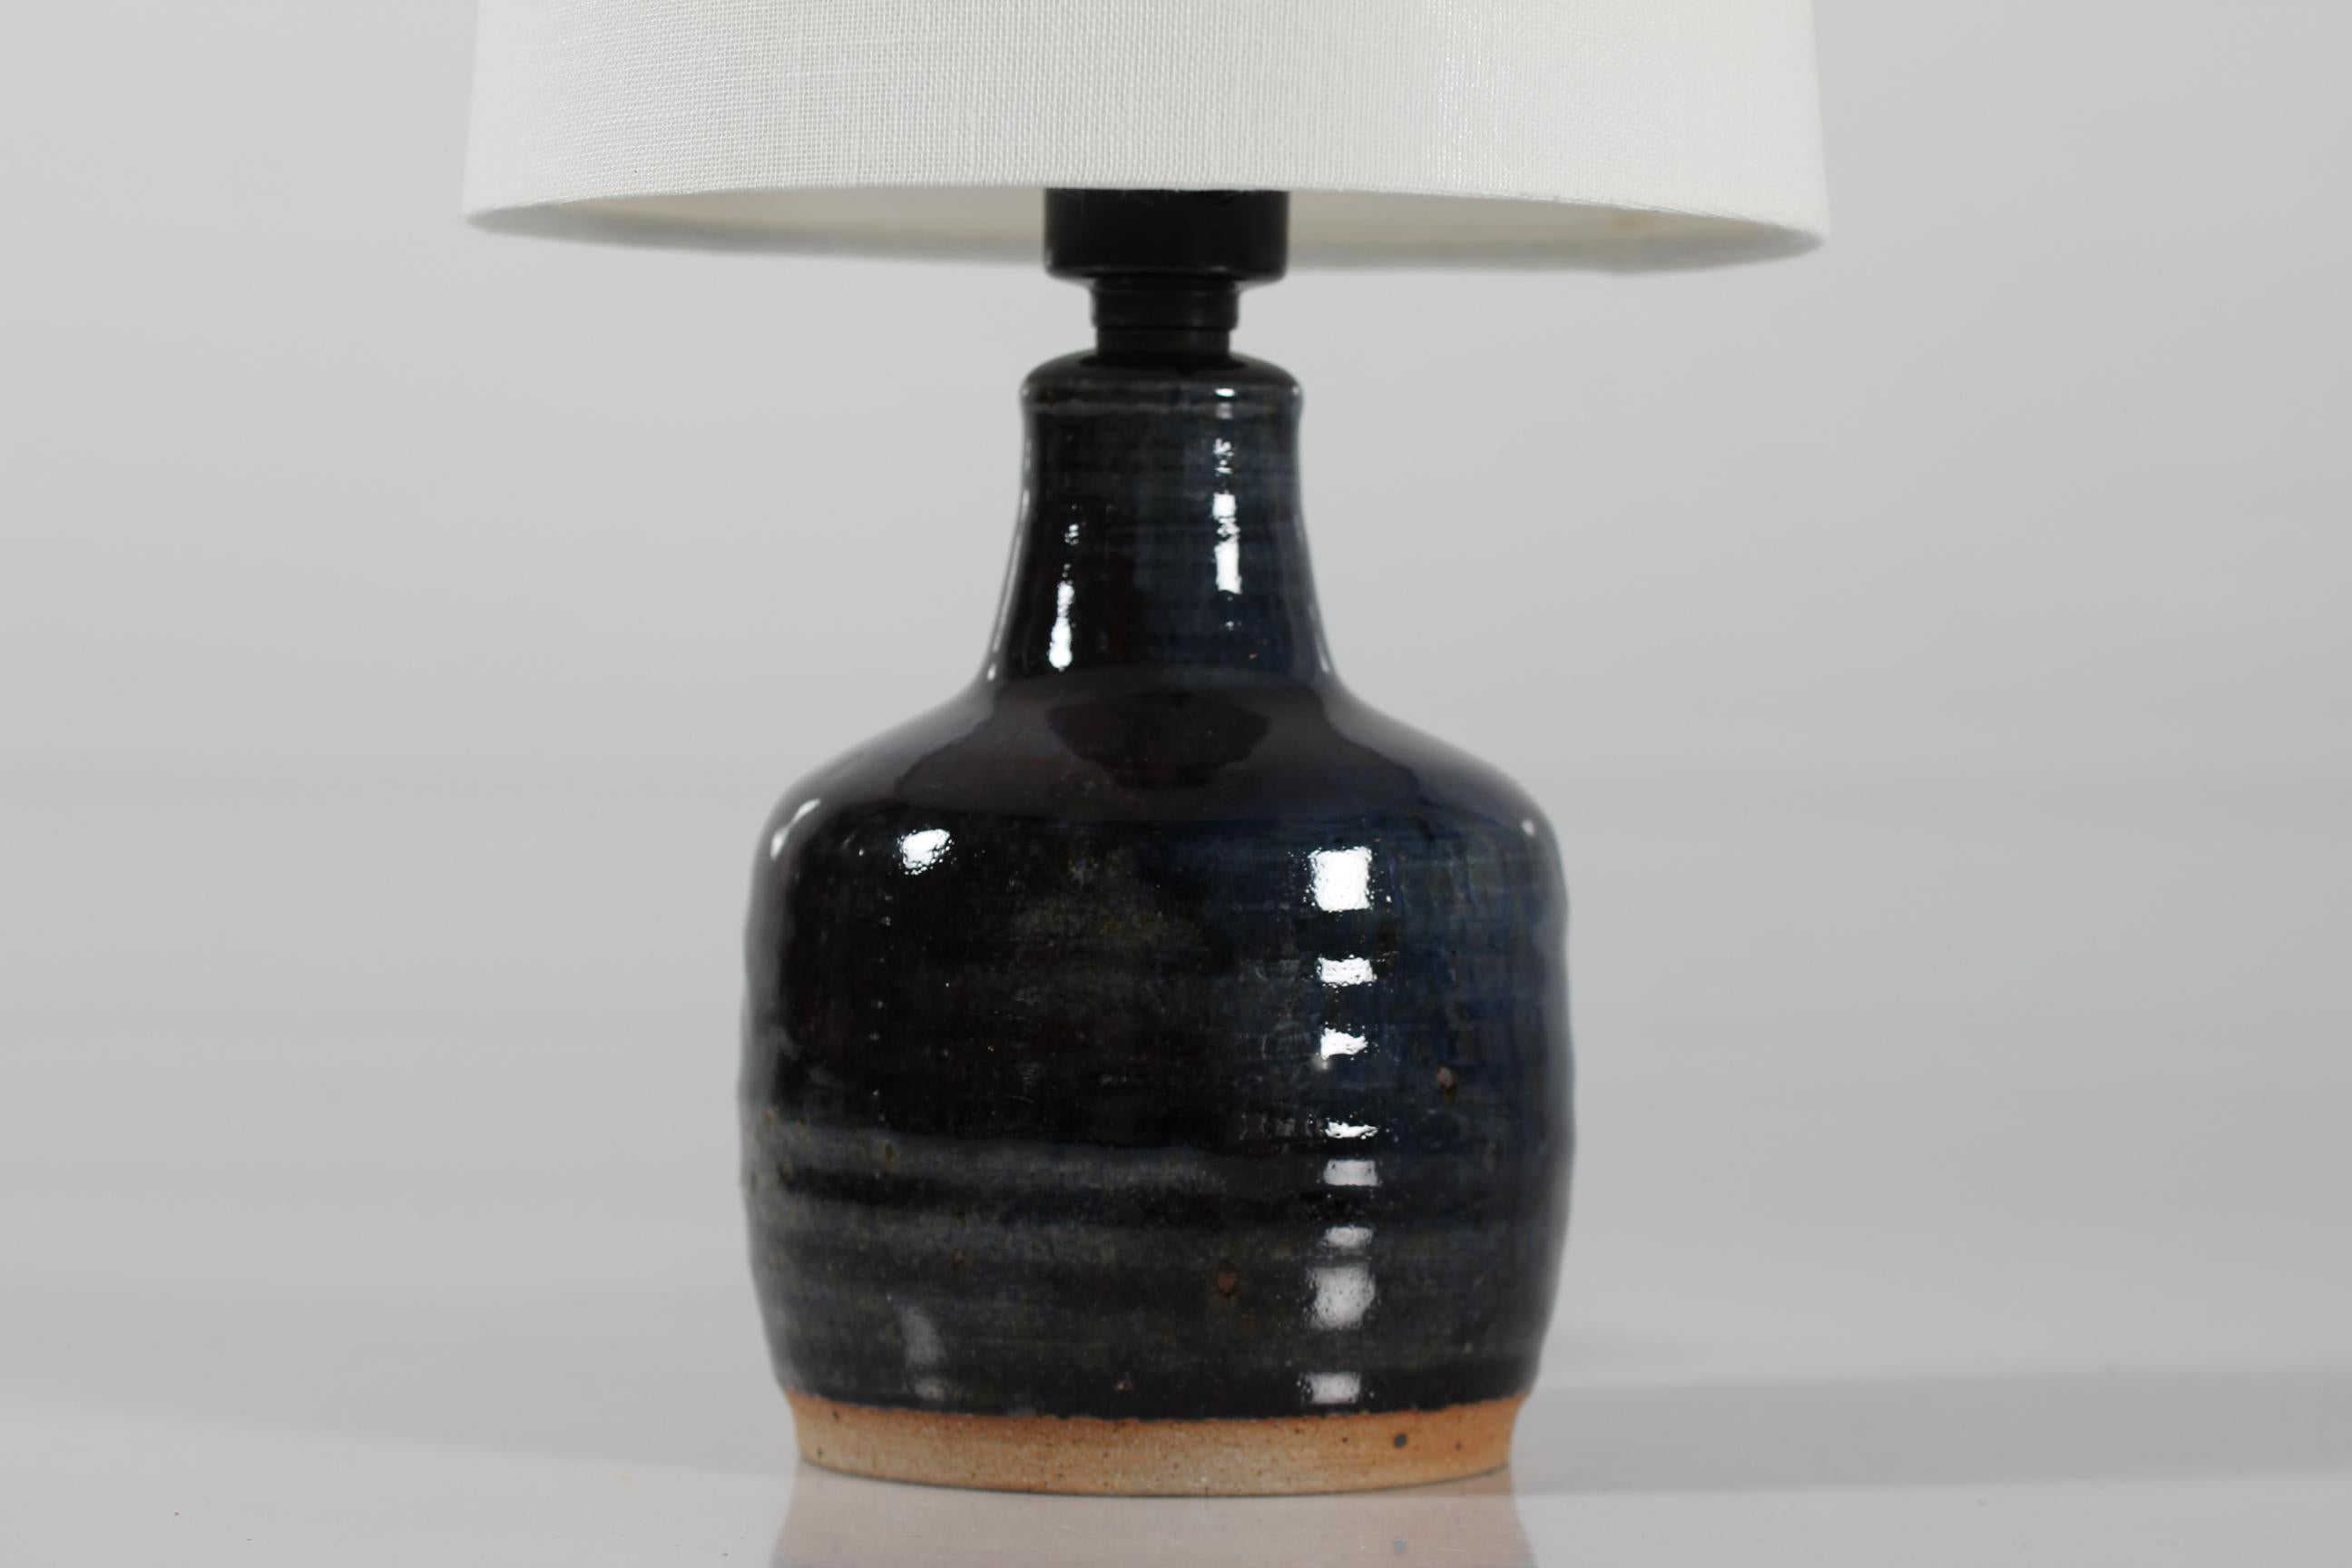 Stoneware bed side table lamp by Danish ceramist and glass artist Finn Lynggaard (1930-2011).
The lamp base is decorated with dark blue glossy glaze in different shades.

Included is a new lamp shade designed and made in Denmark. It's made of woven